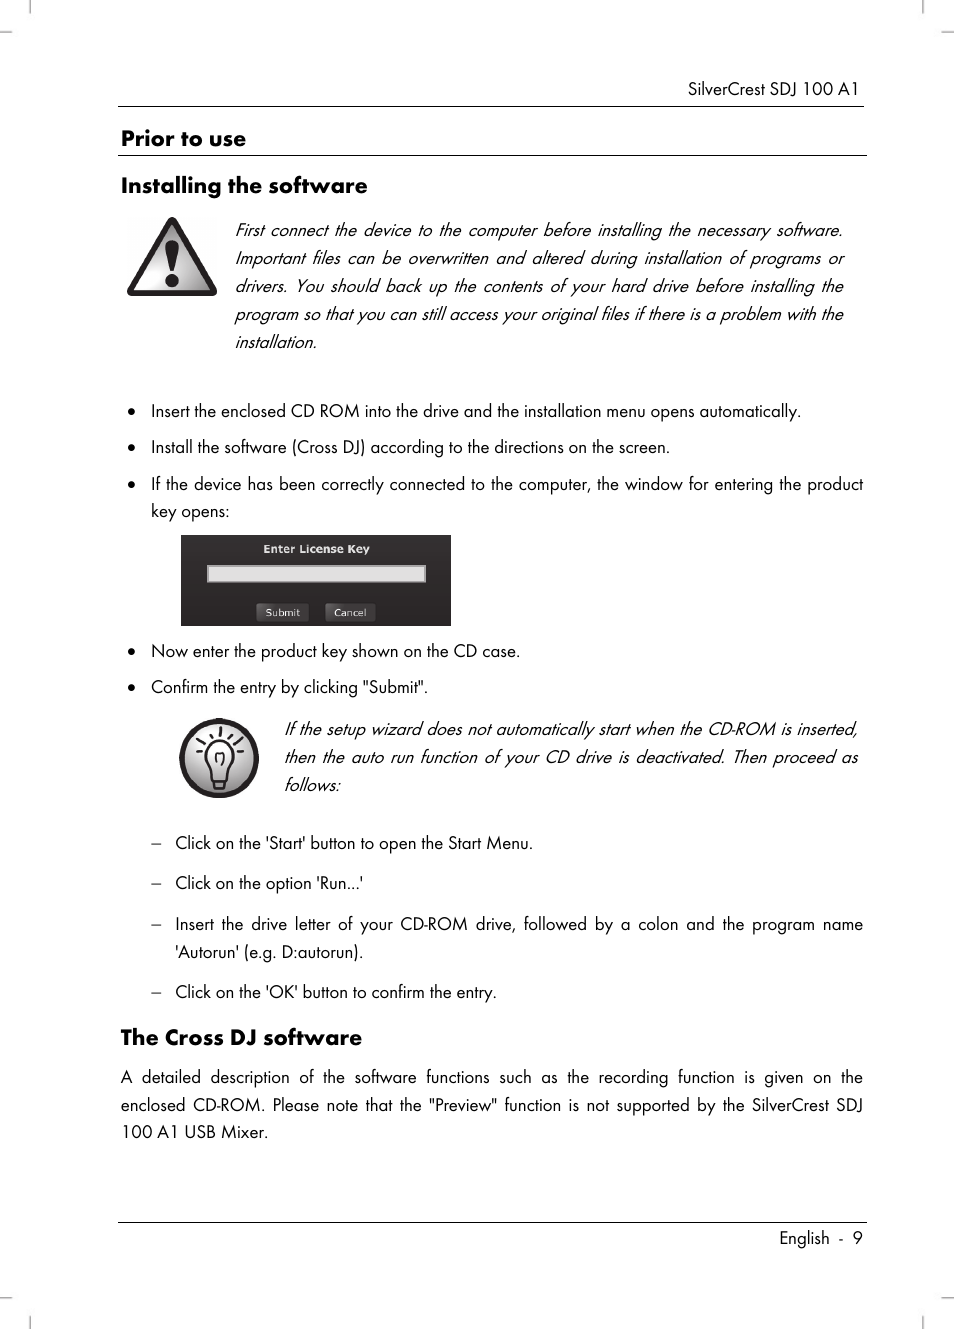 Prior to use installing the software, The cross dj software | Silvercrest  SDJ 100 A1 User Manual | Page 11 / 90